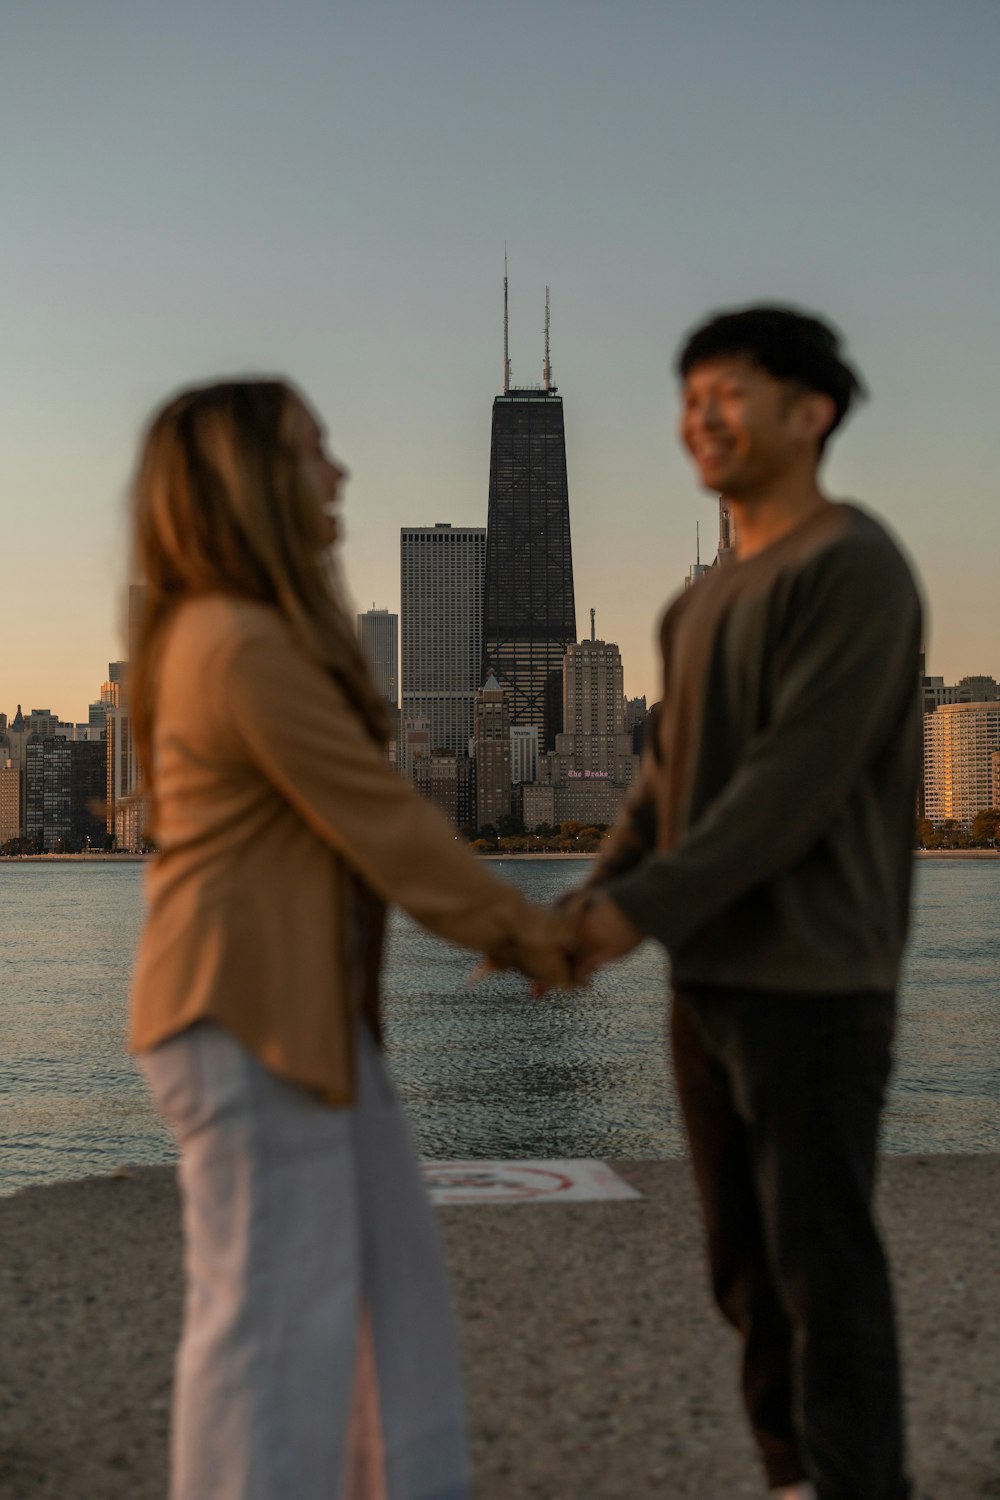 a man and woman shaking hands on a beach with a city skyline in the background